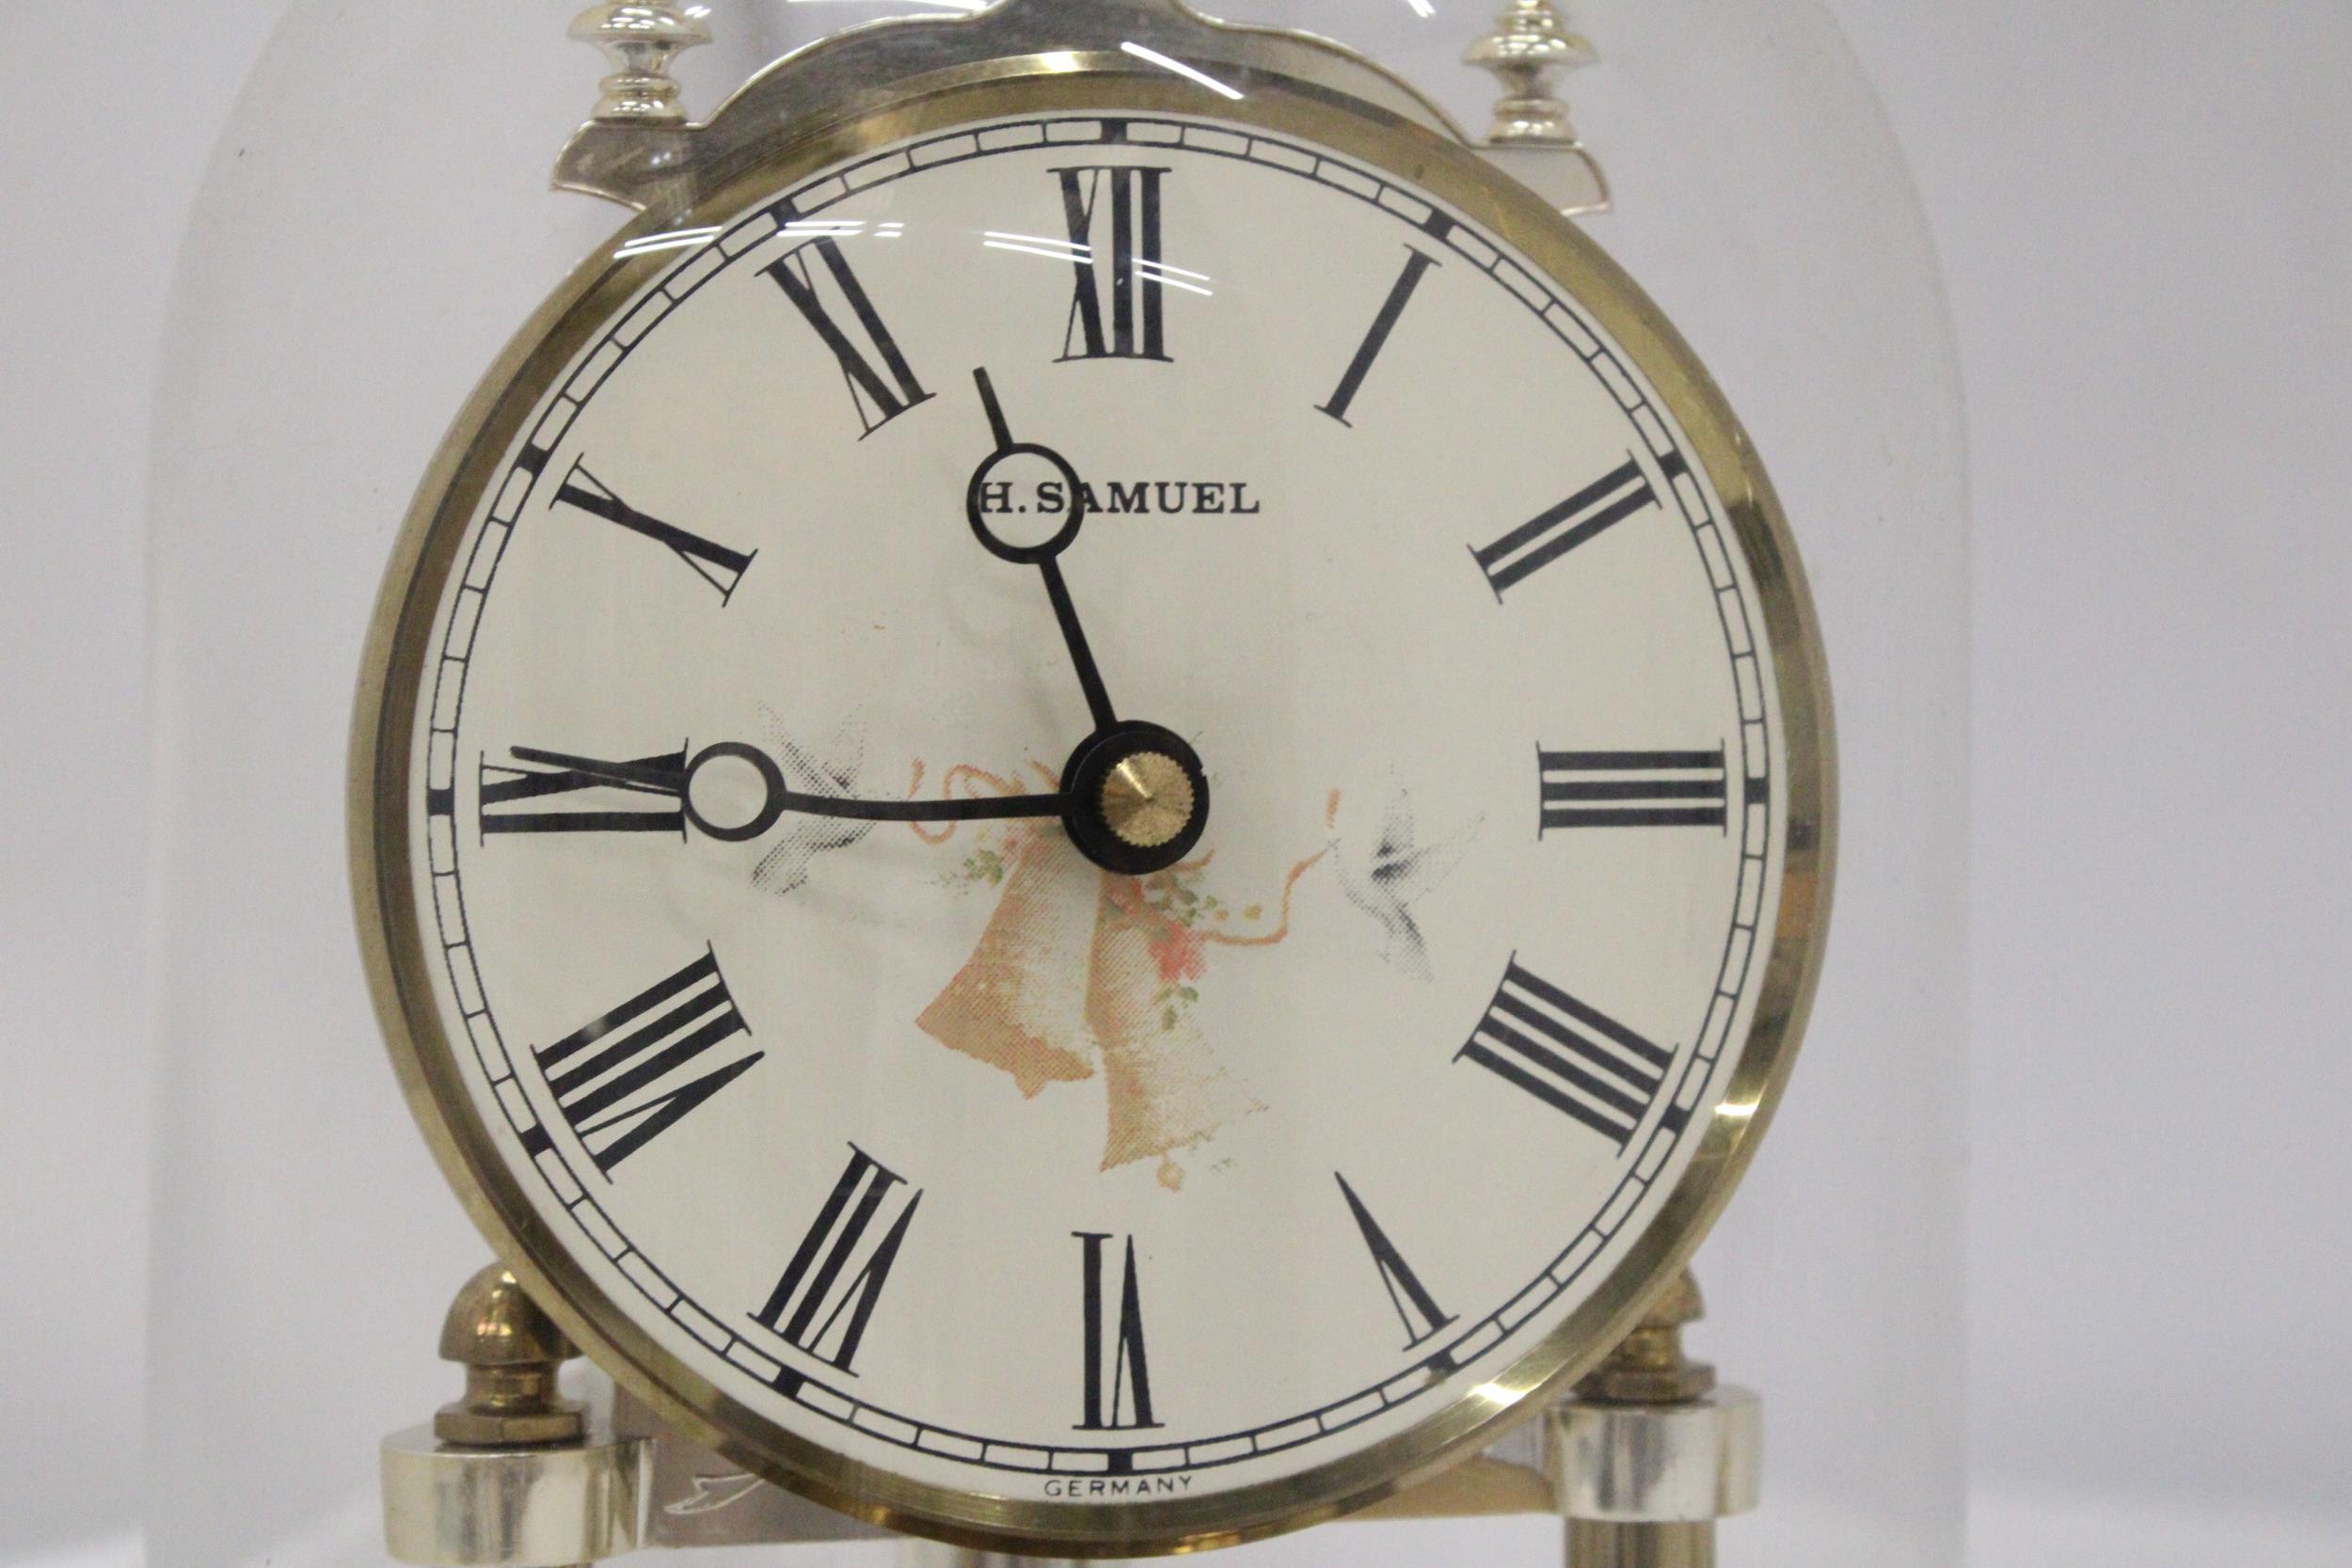 TWO BRASS ANNIVERSARY CLOCKS WITH GLASS DOMES - Image 6 of 6